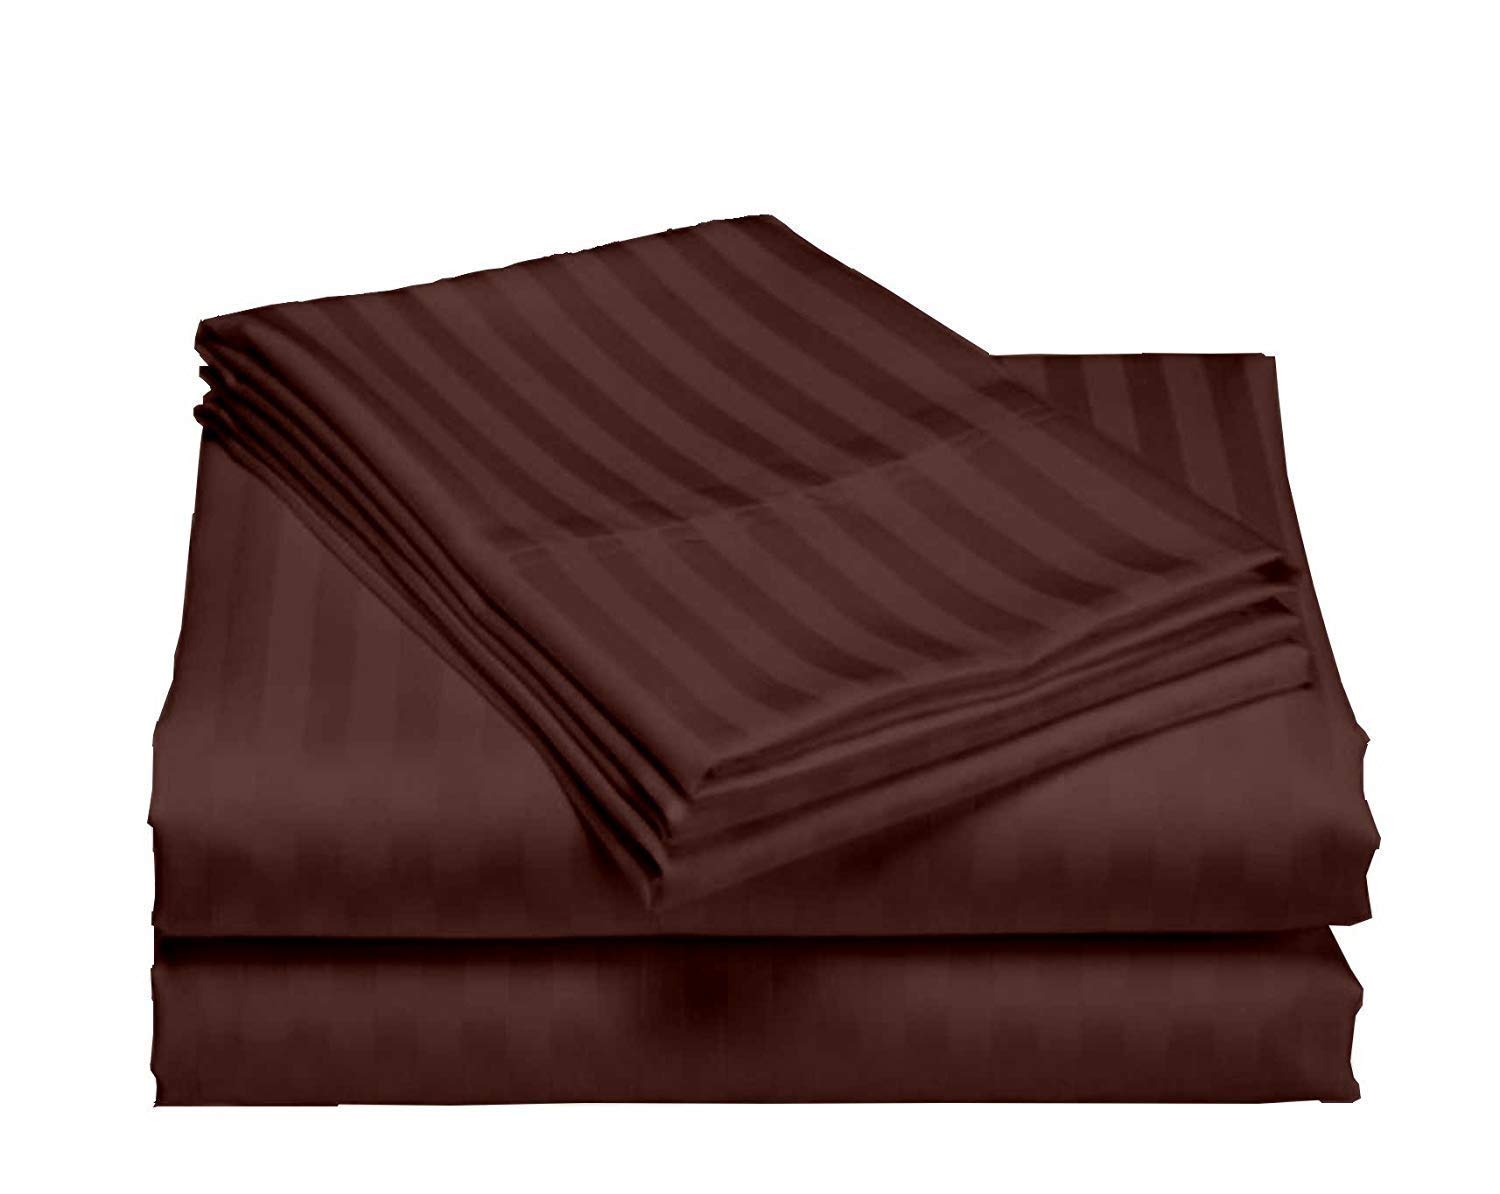 Kuber Industries 4 Pieces Cotton Luxurious Satin Striped Pillow Cover Set-17"x27" (Brown) - CTKTC40342